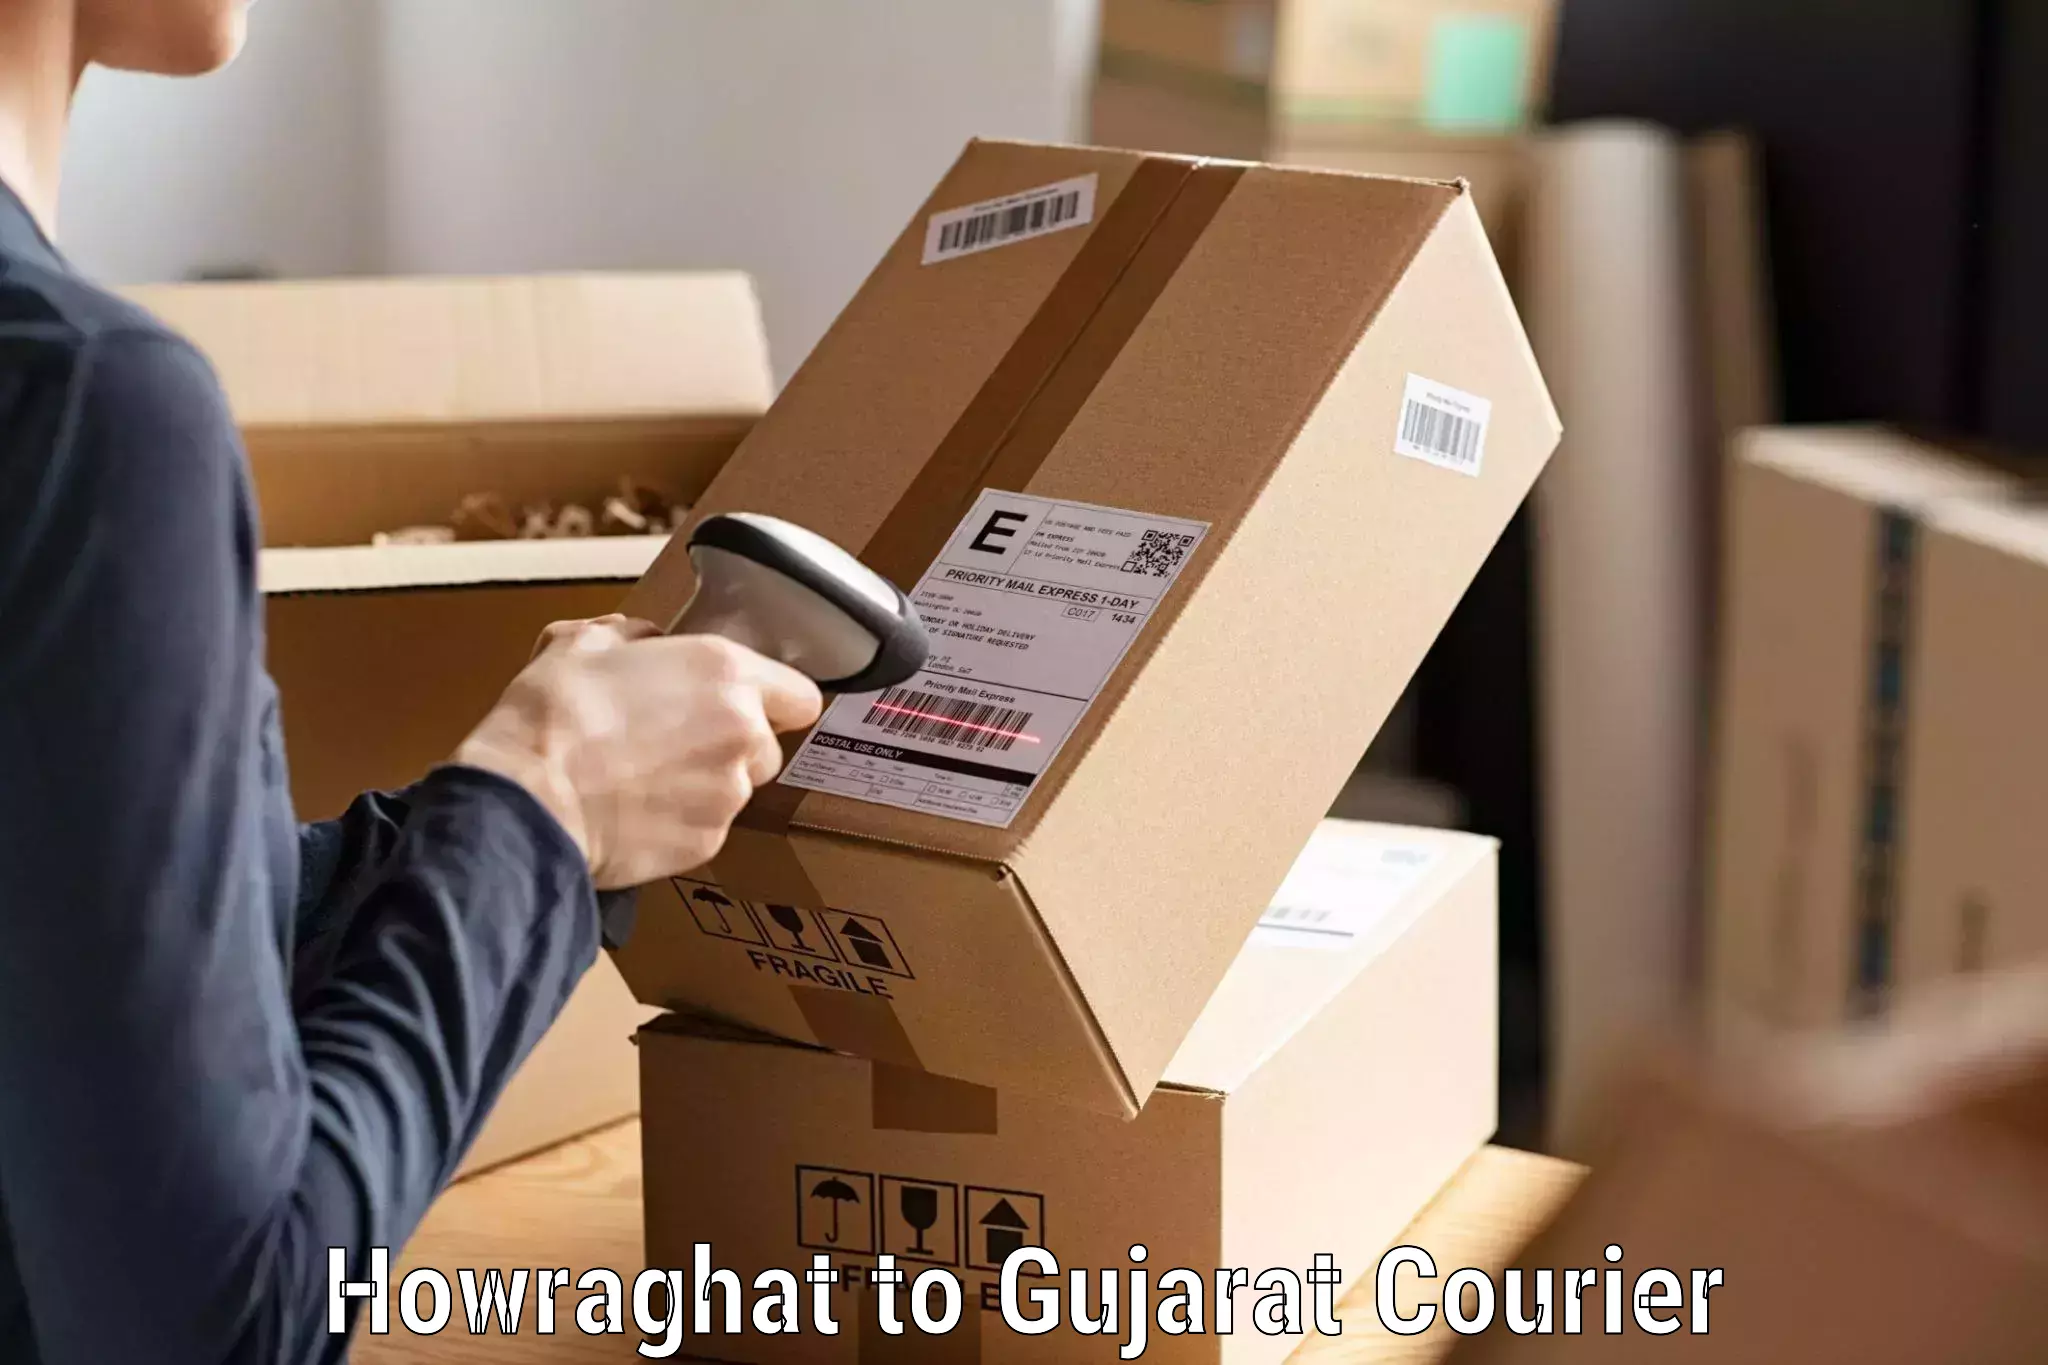 Cargo delivery service Howraghat to Ahmedabad